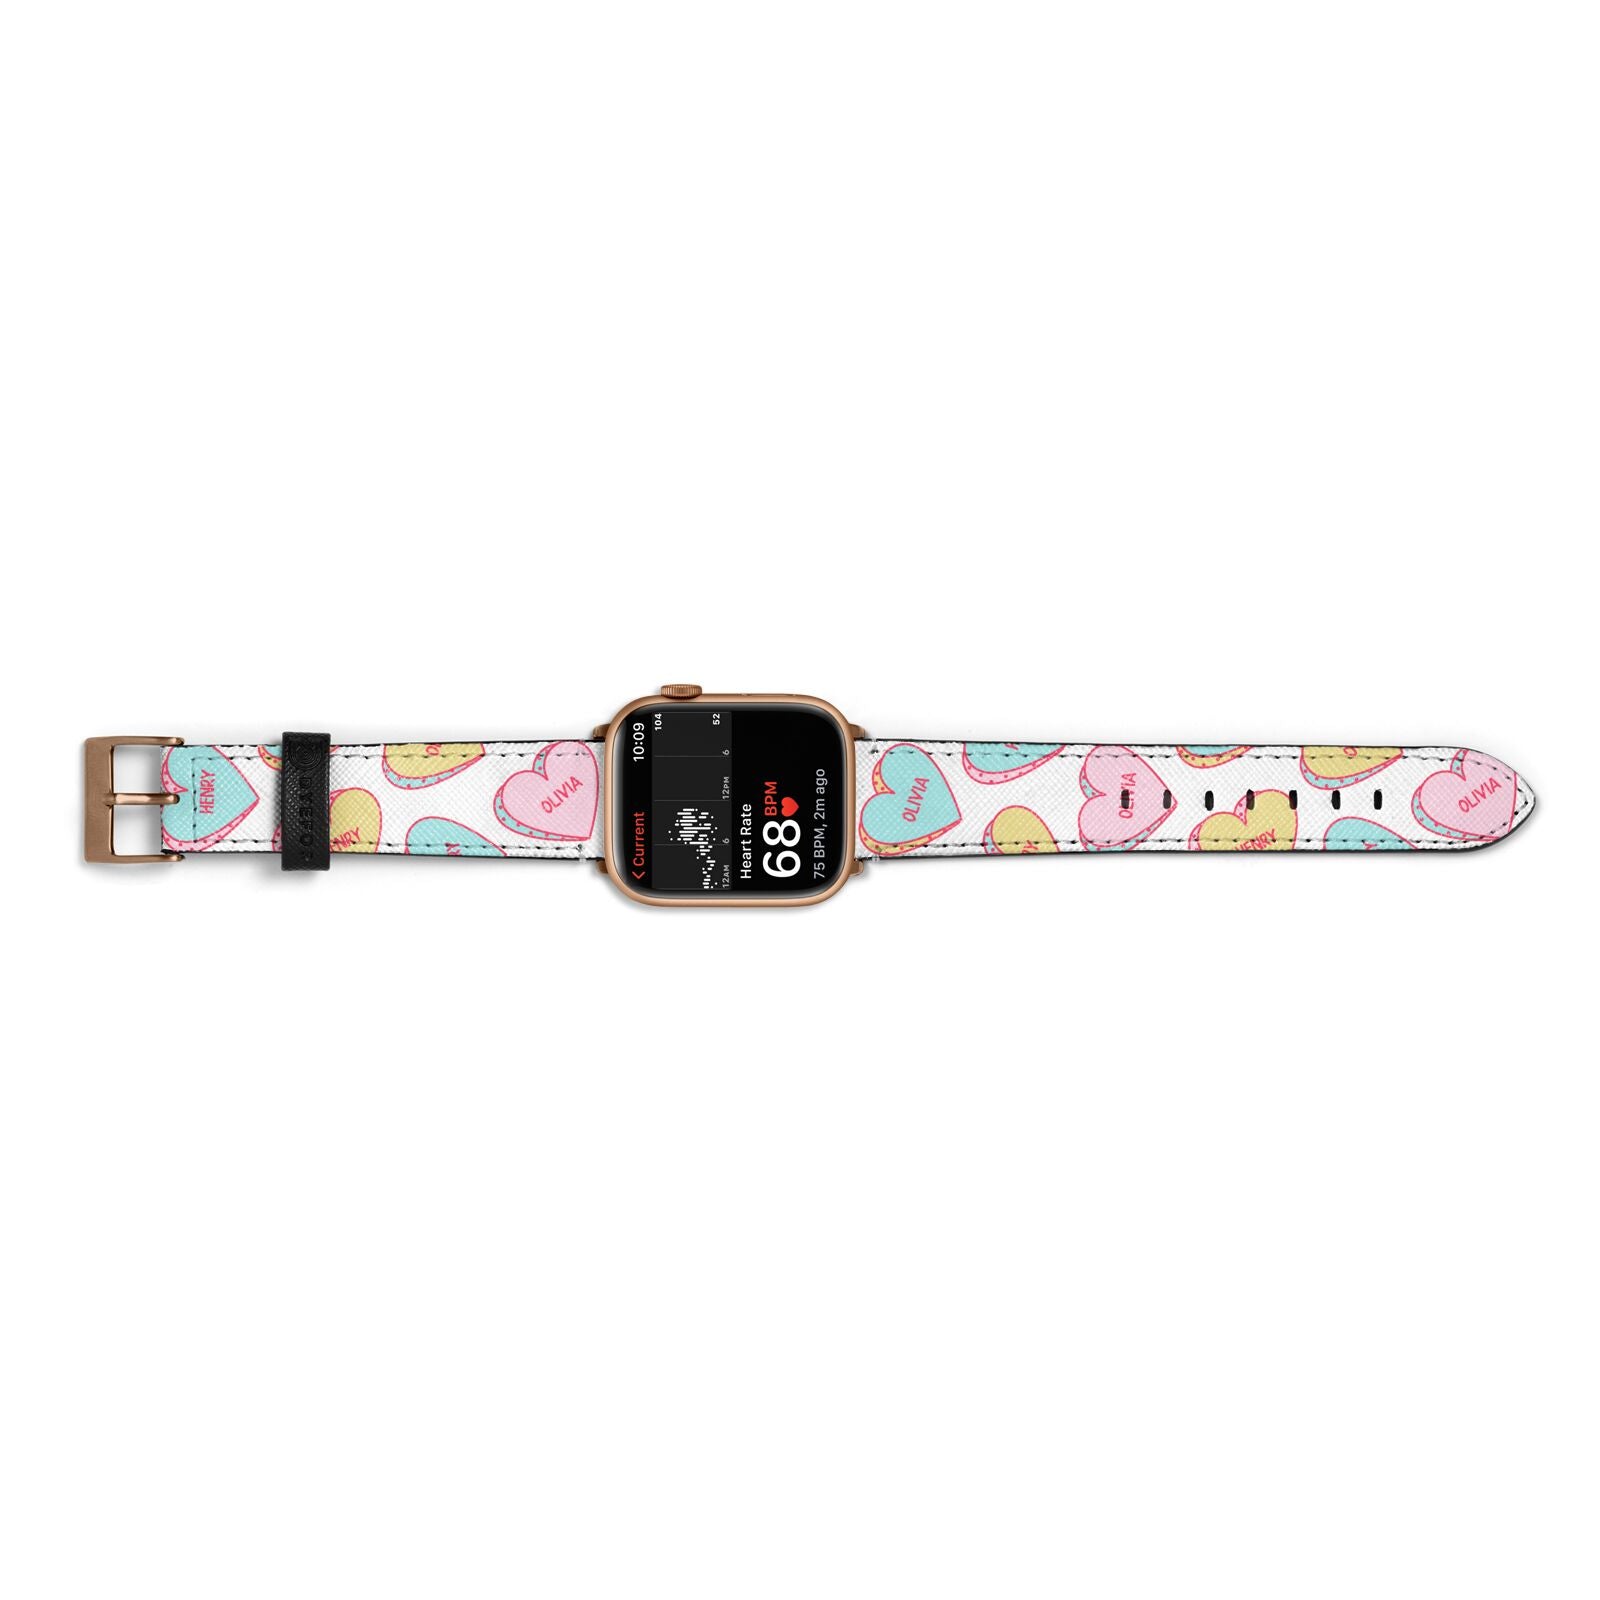 Personalised Heart Sweets Apple Watch Strap Size 38mm Landscape Image Gold Hardware